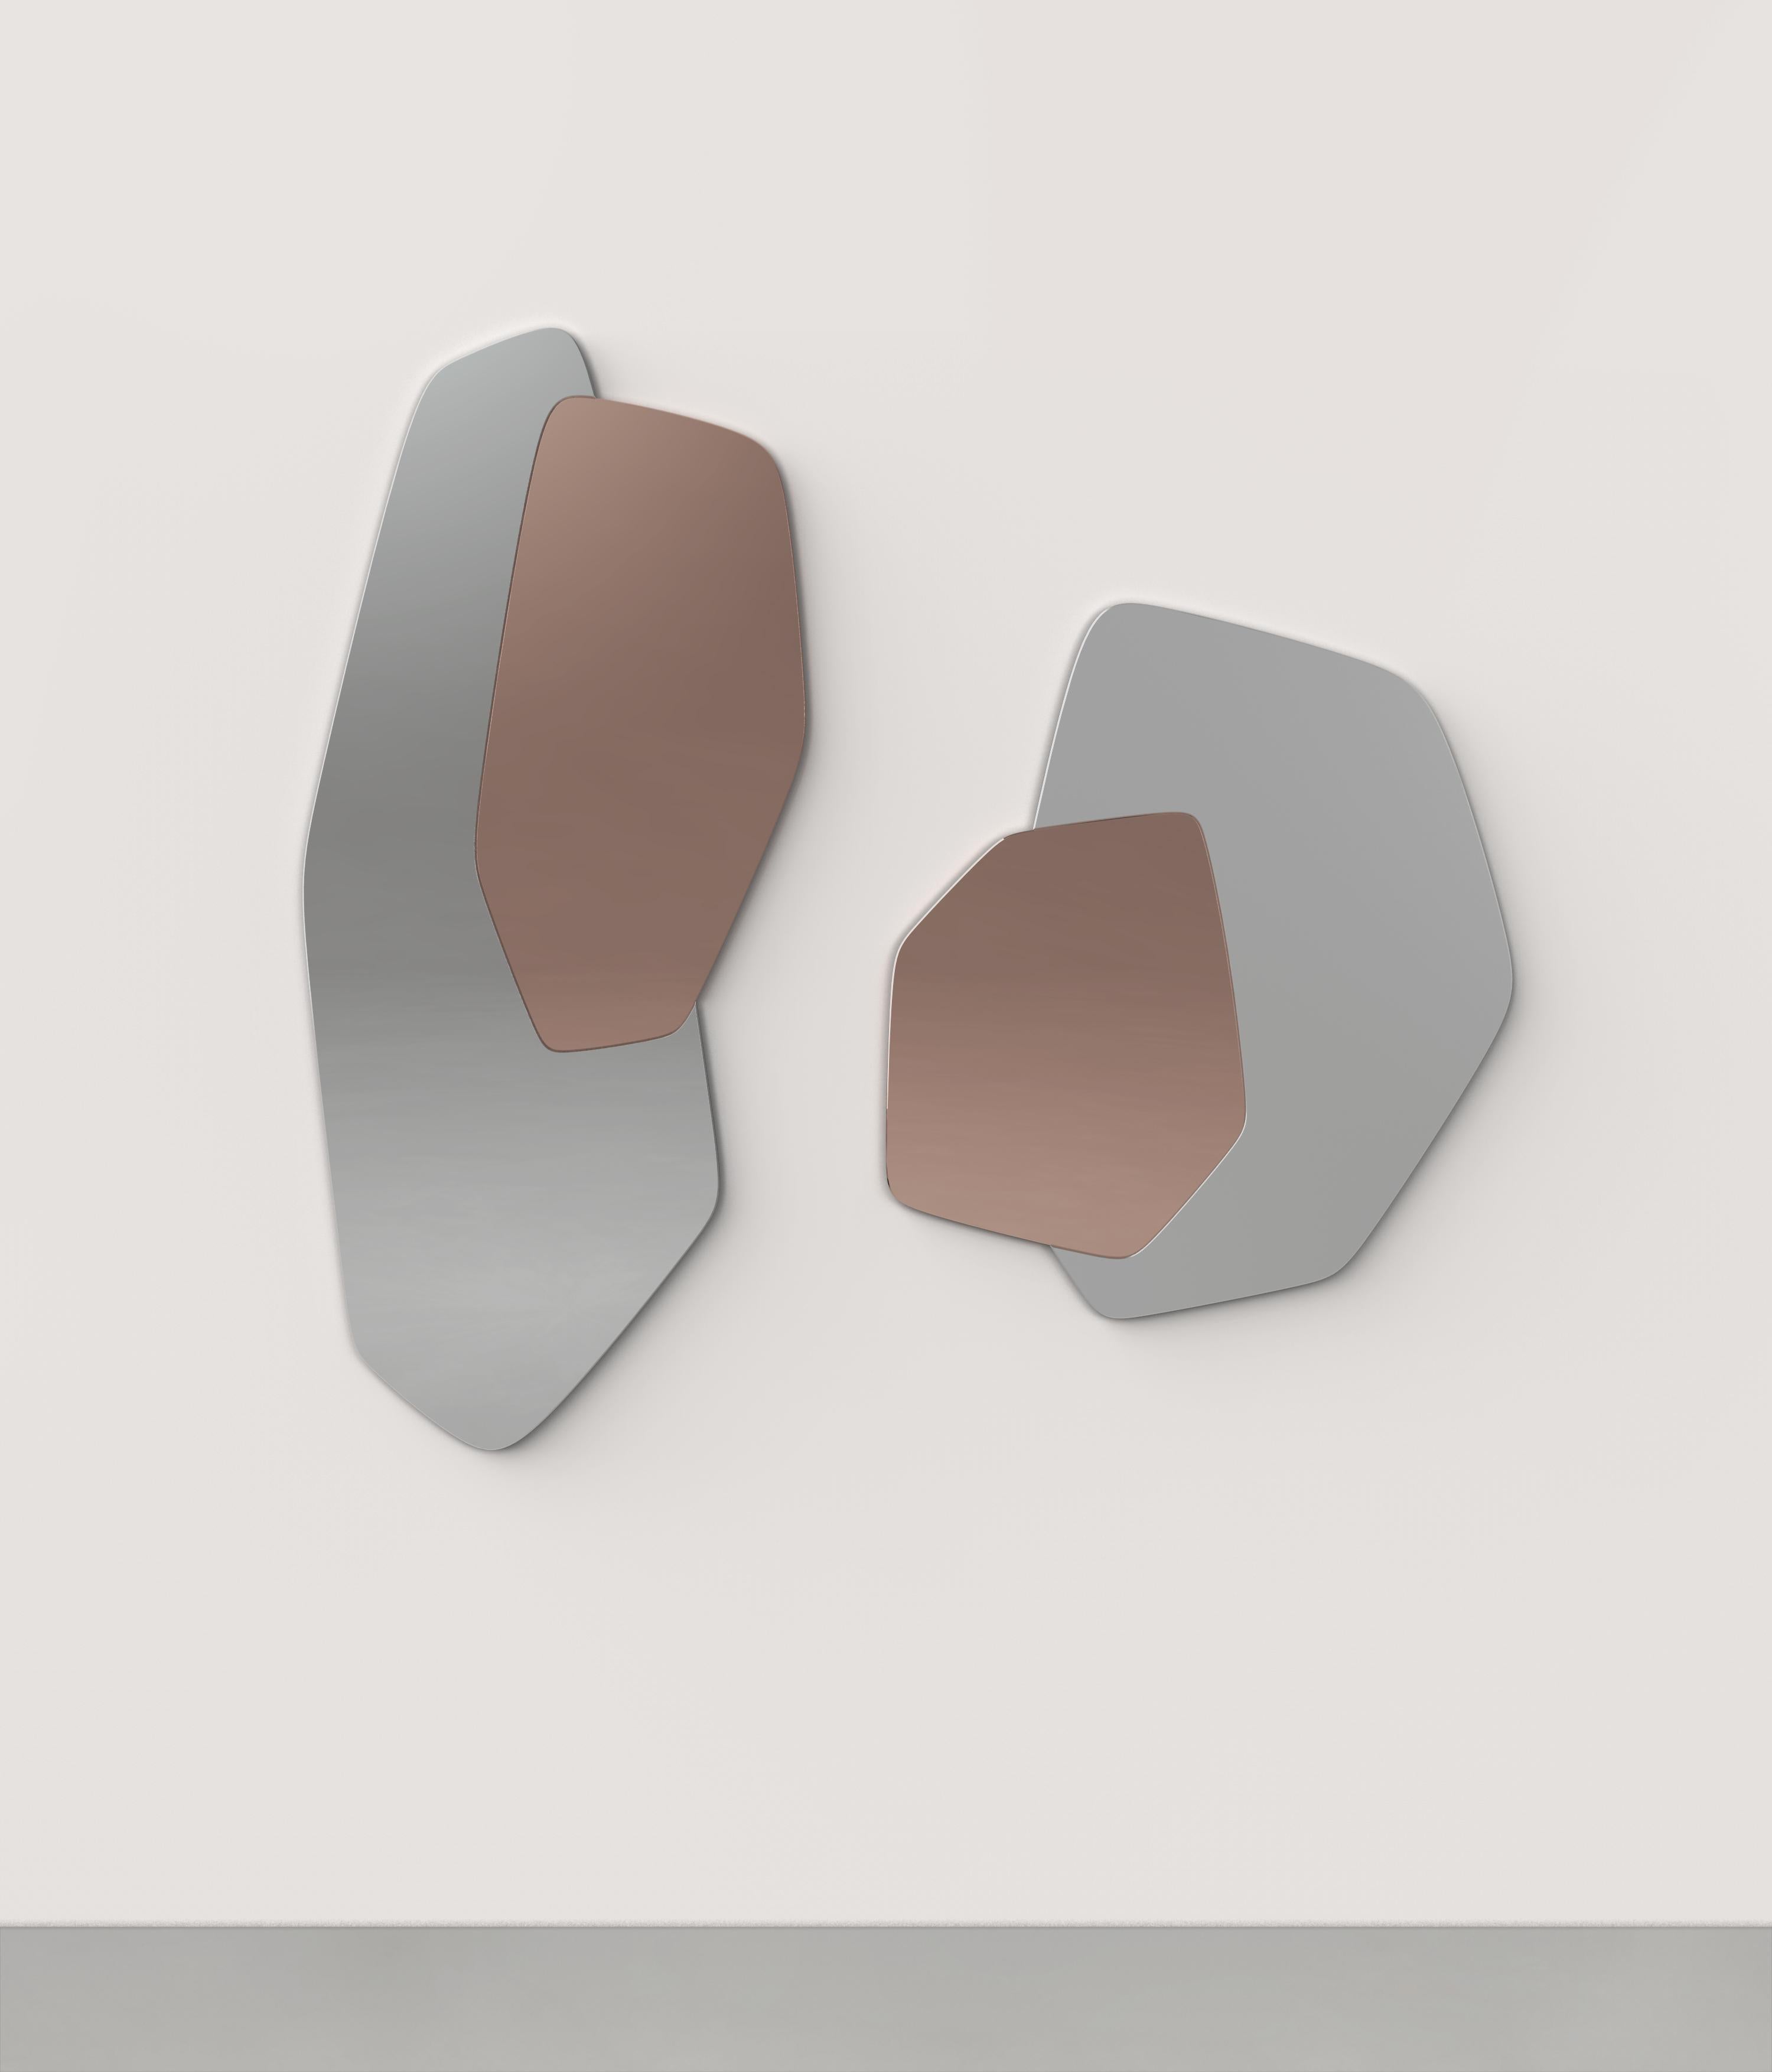 Set of 2 Nori V1 and V2 wall mirrors by Edizione Limitata
Limited Edition of 1000 pieces. Signed and numbered.
Dimensions: D 56 x W 0.5 x H 124 cm // D 70 x W 0.5 x H 79 cm.
Materials: classic finish mirror+ copper finish mirror// classic finish